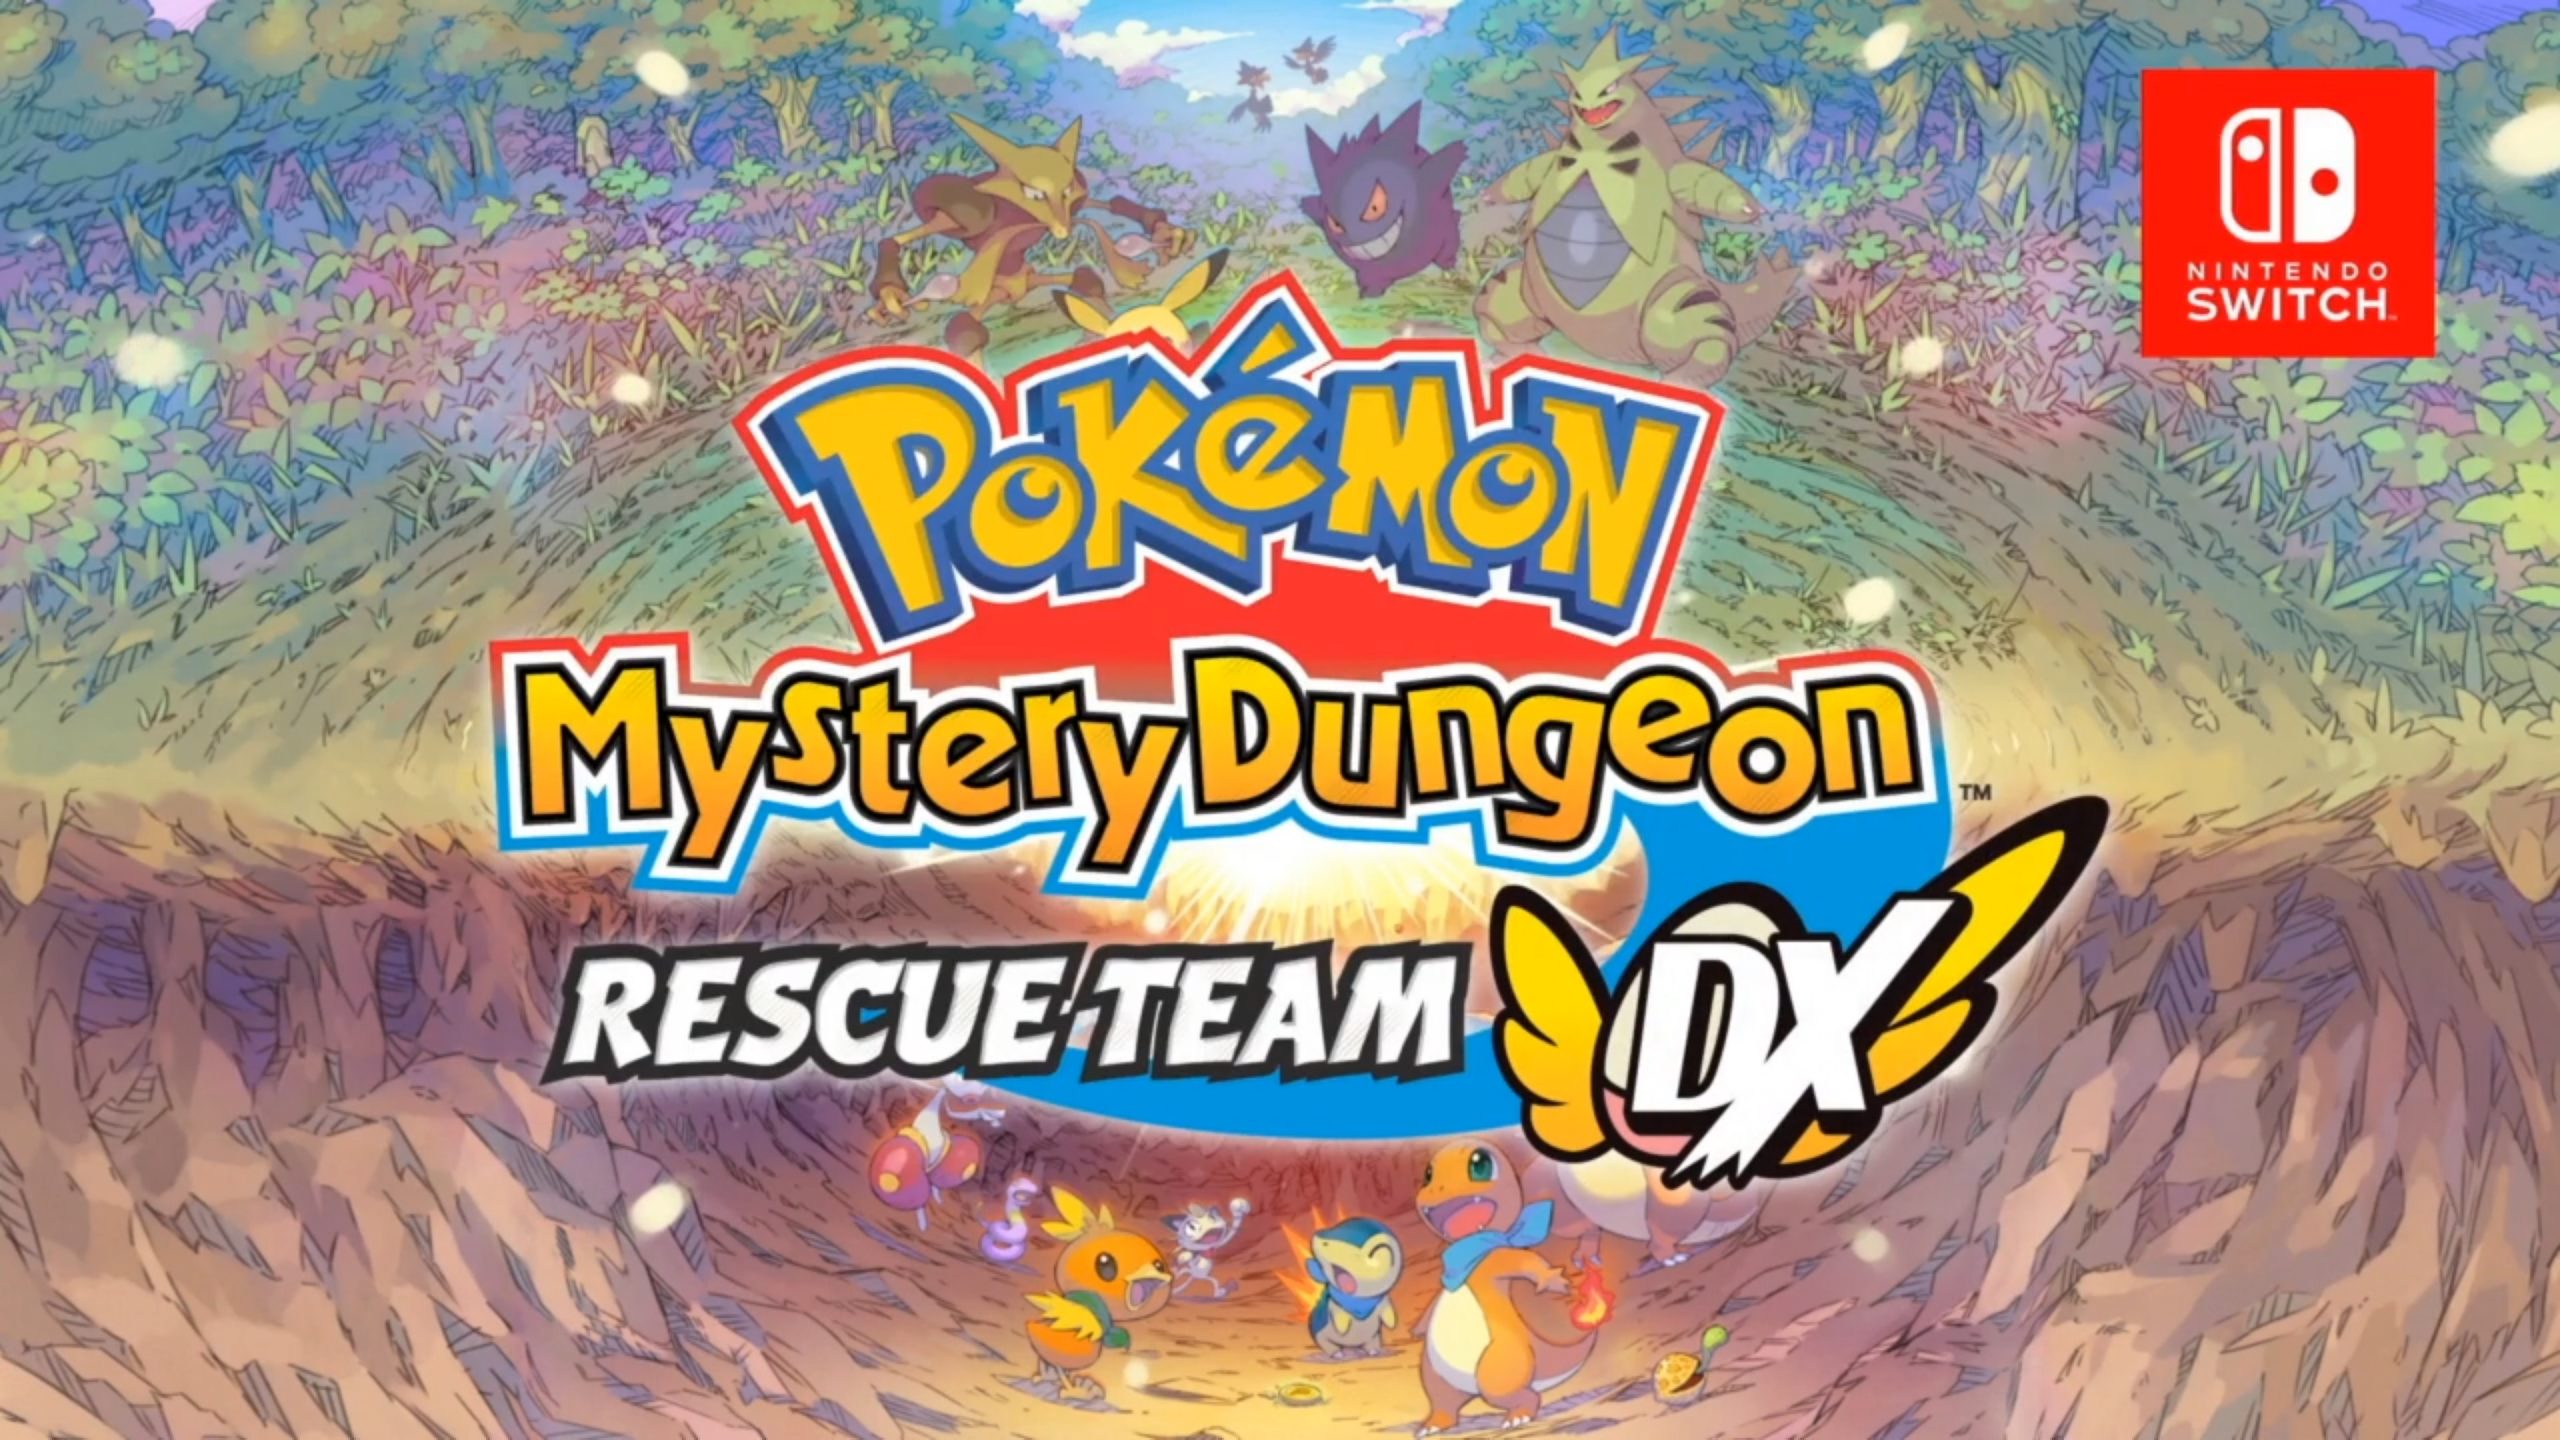 Pokemon Mystery Dungeon Rescue Team Beginners’ Guide: 15 Things I Wish I Knew Earlier